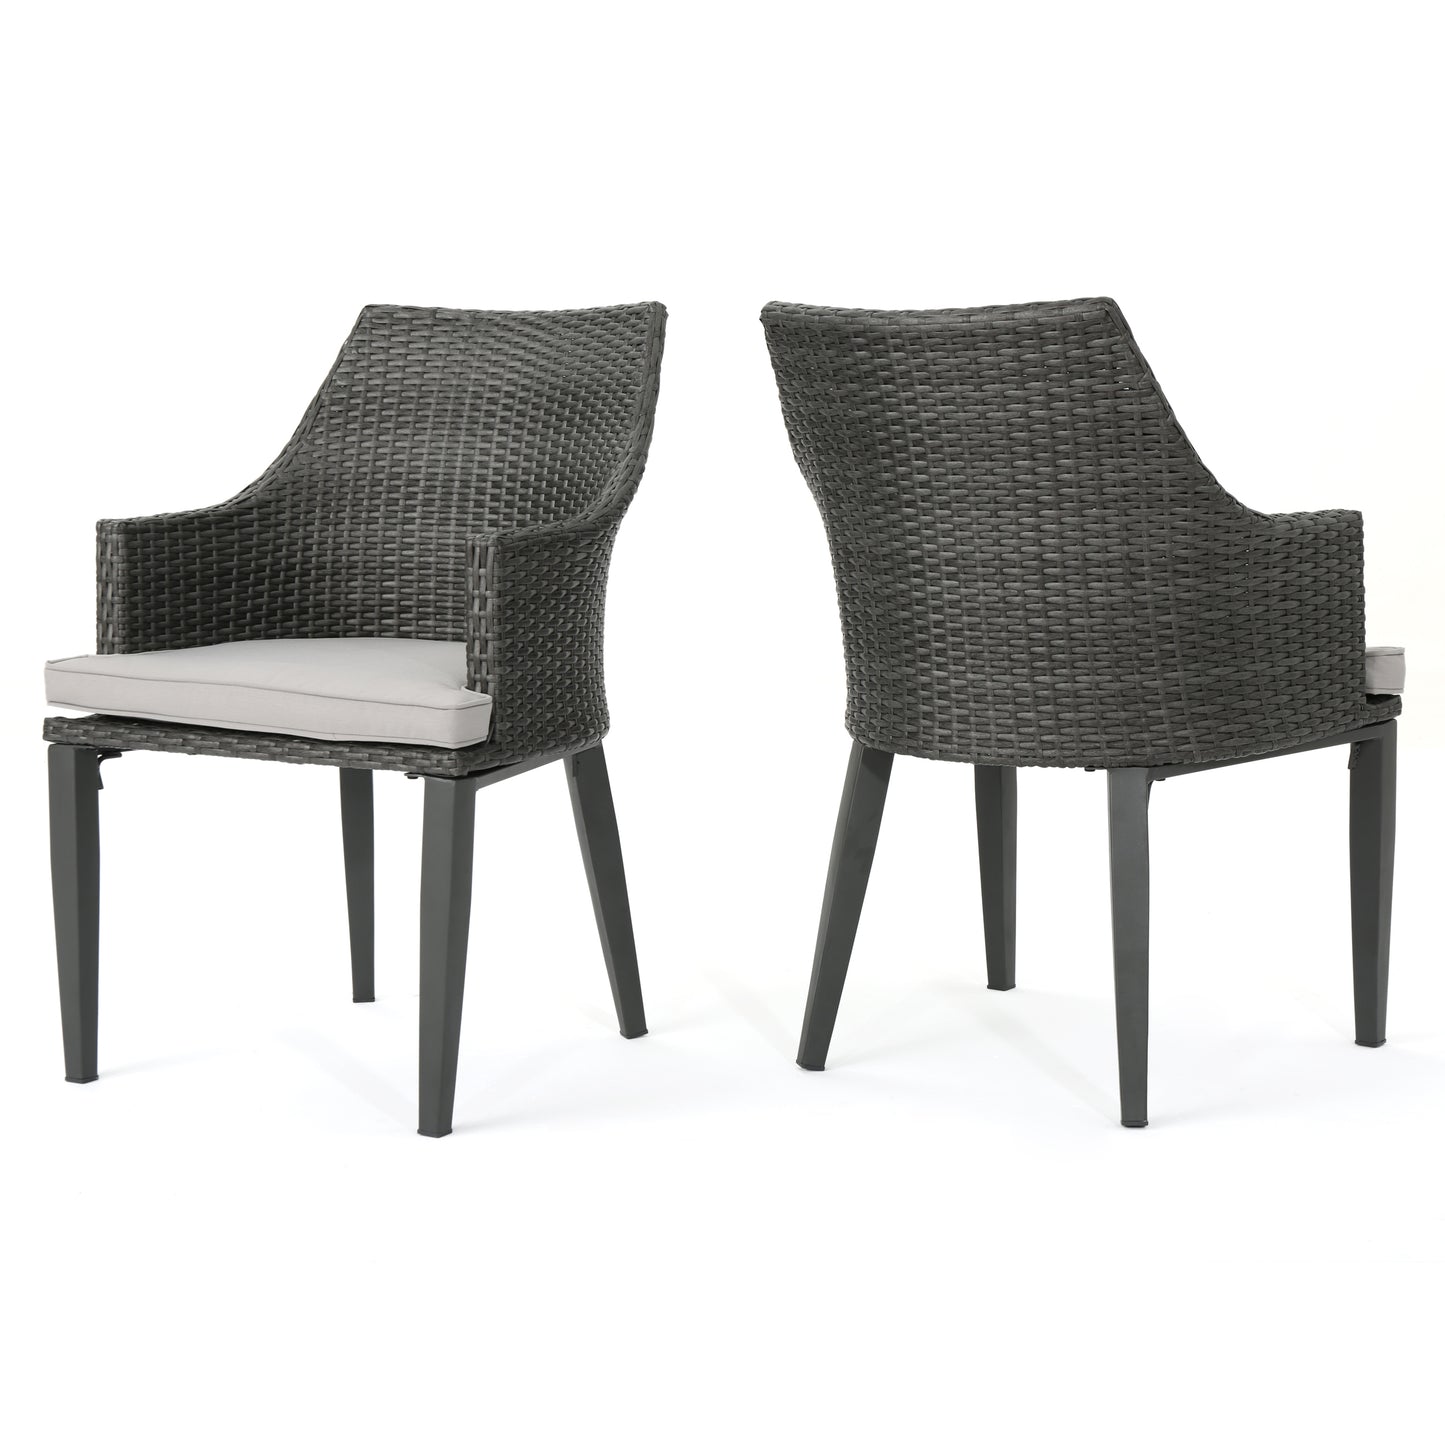 Hillcrest Outdoor Wicker Dining Chairs with Water Resistant Cushions (Set of 2)